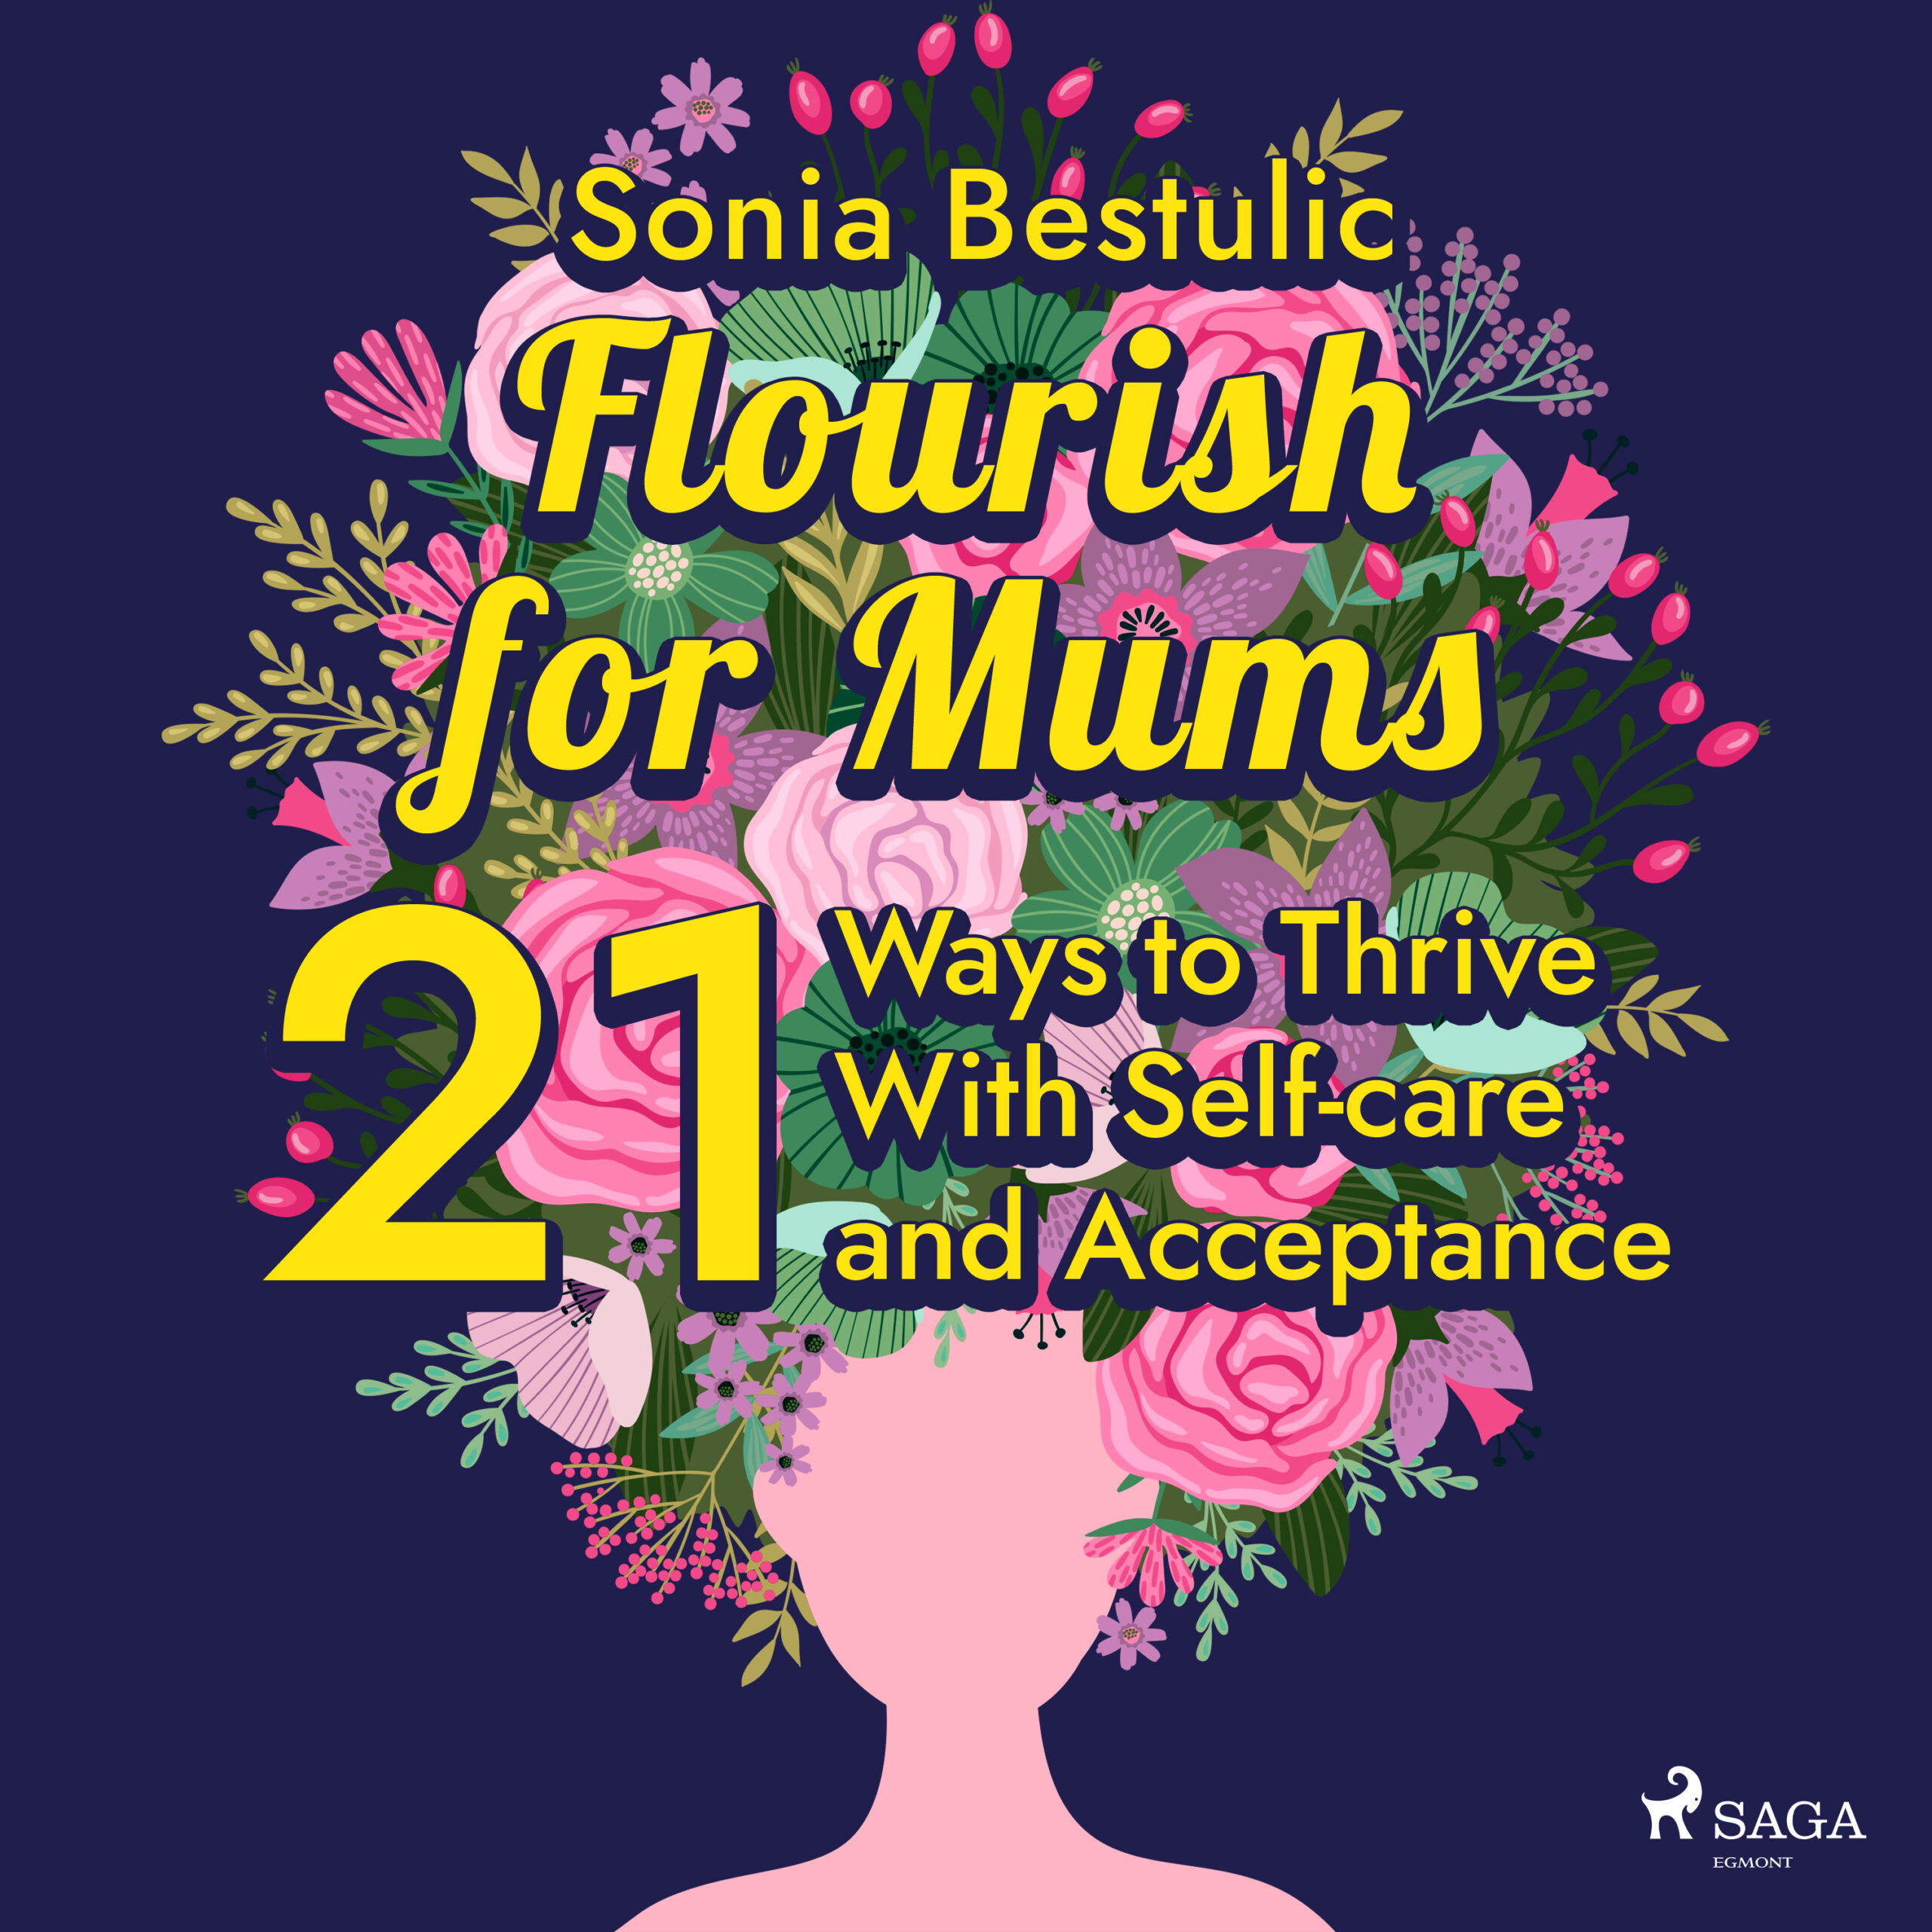 Flourish for Mums 21 Ways to Thrive With Self-care and Acceptance abook